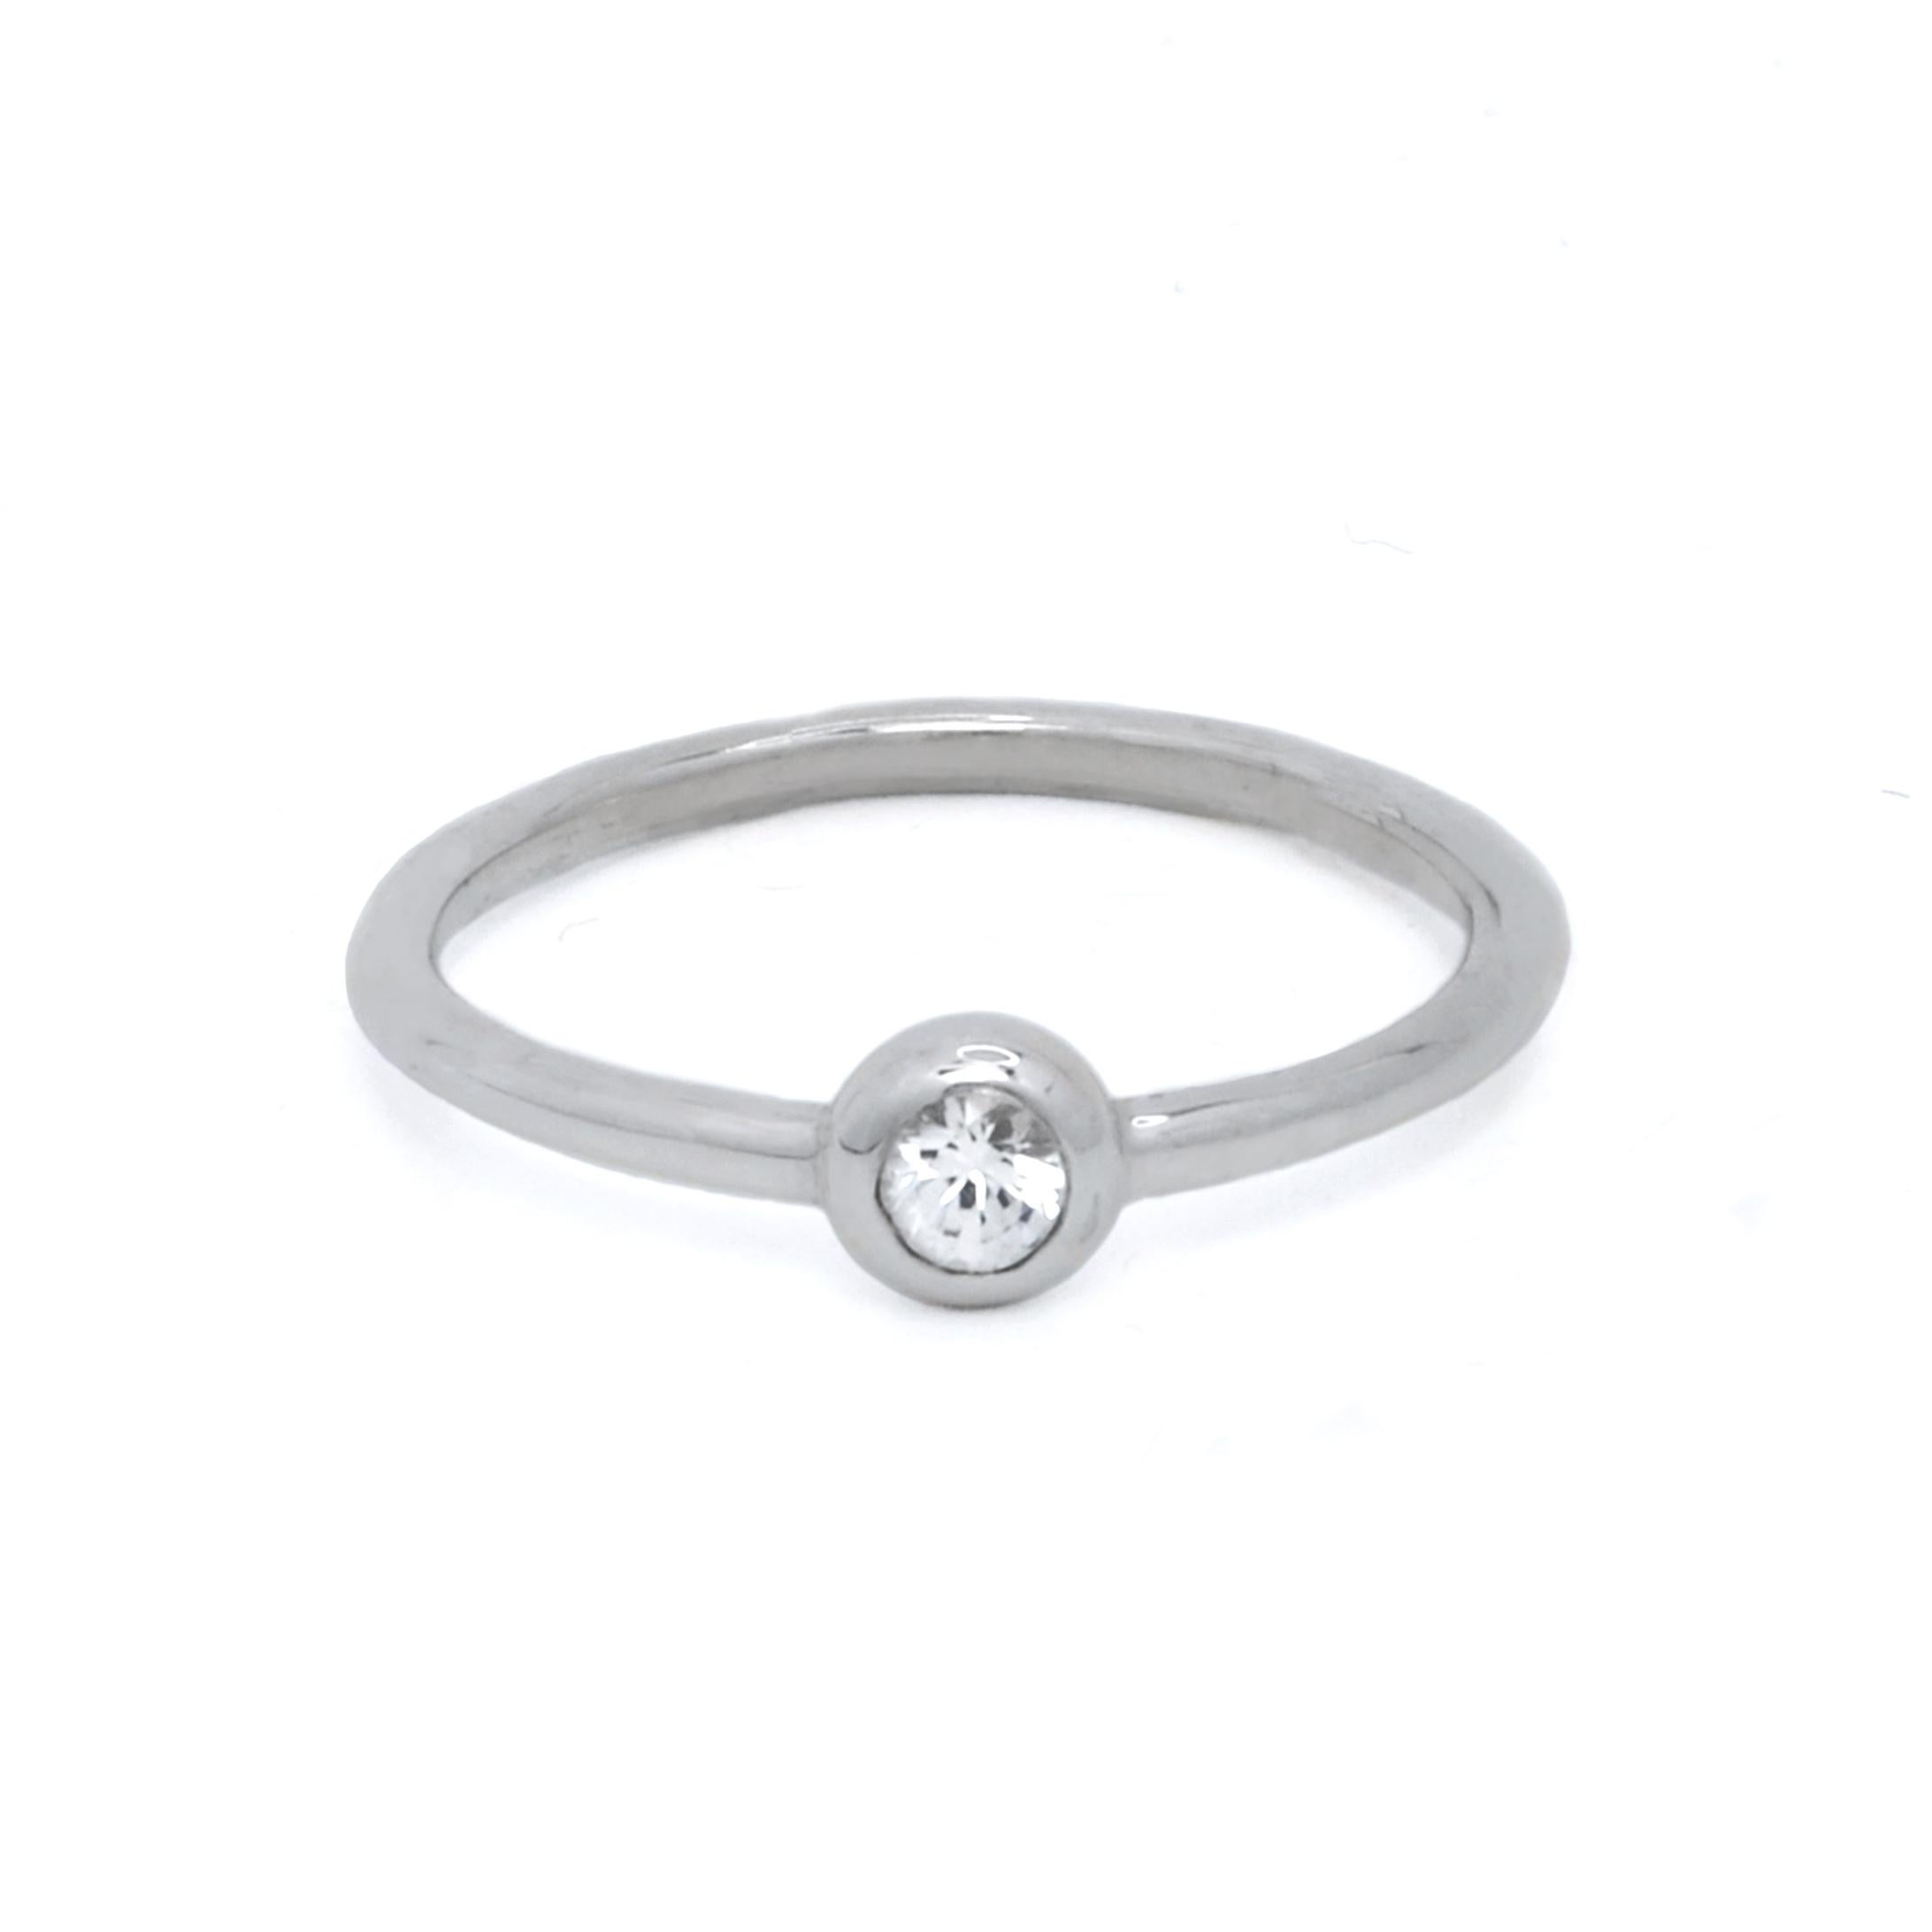 For Sale:  Ruth Nyc Ane Ring, Solitaire Diamond Ring in 14k White Gold